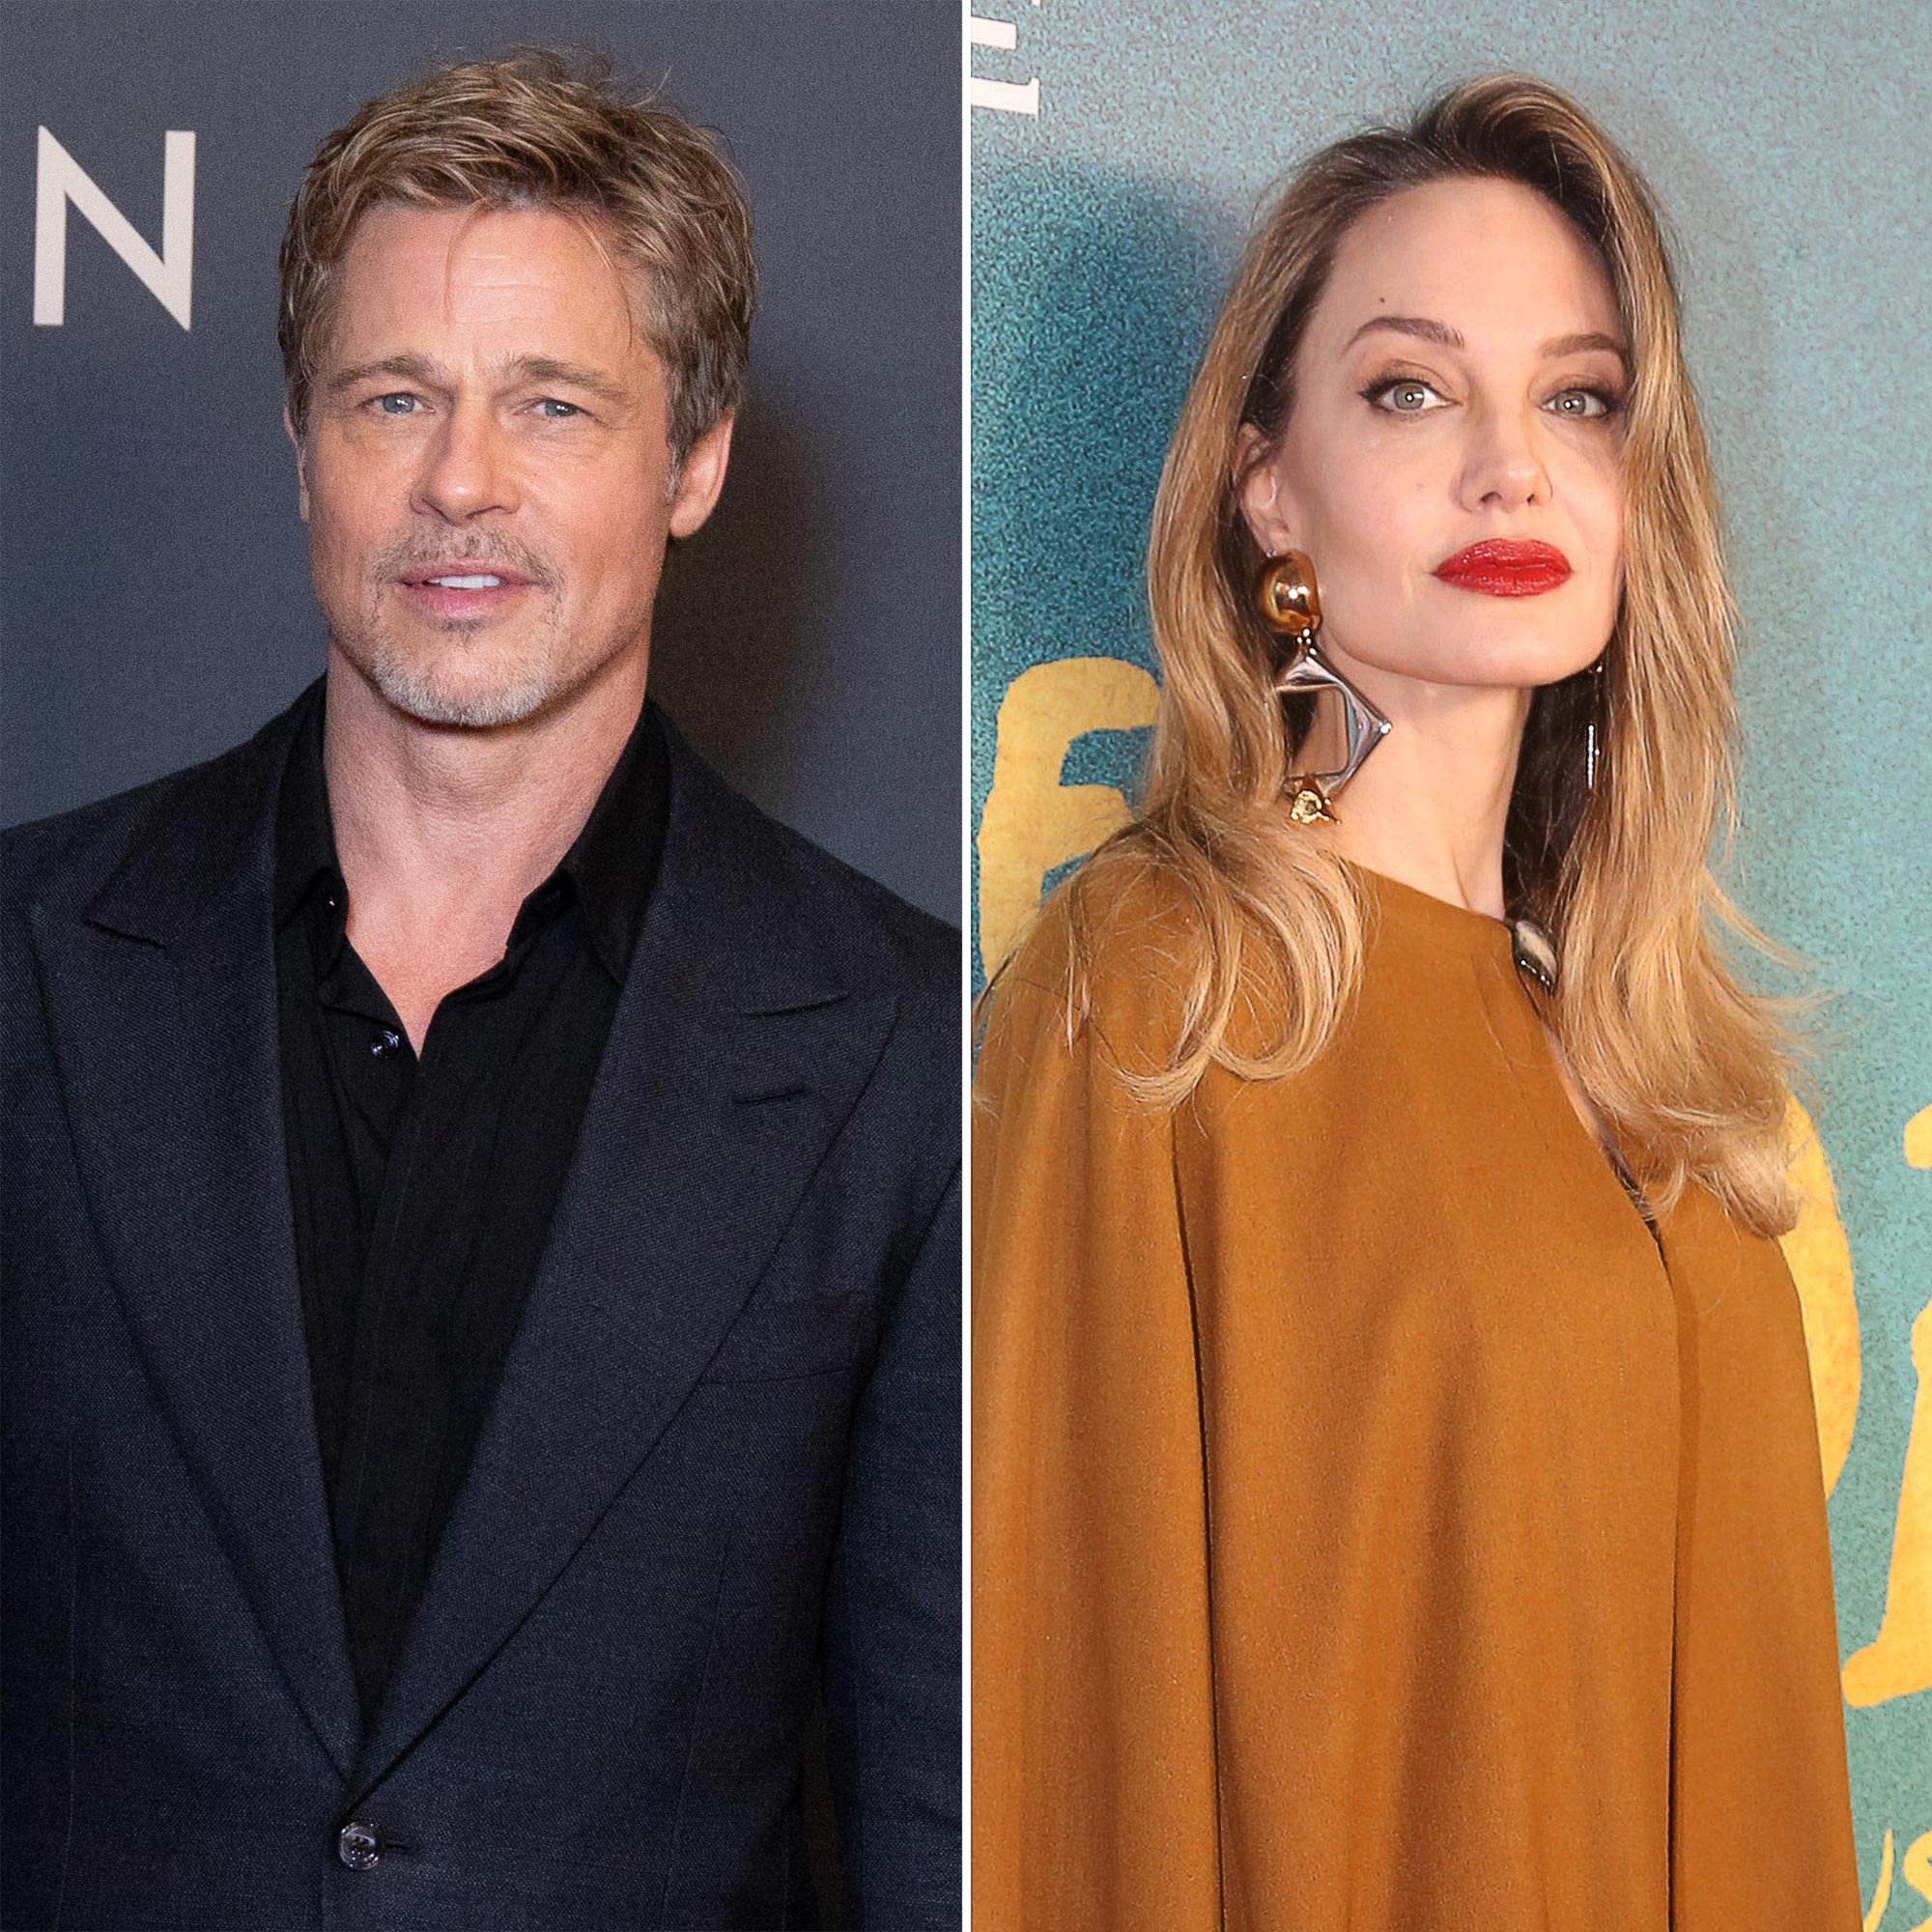 Angelina Jolie Asks Brad Pitt to Drop Lawsuit and ‘End the Fighting’ to Help With Family ‘Healing’